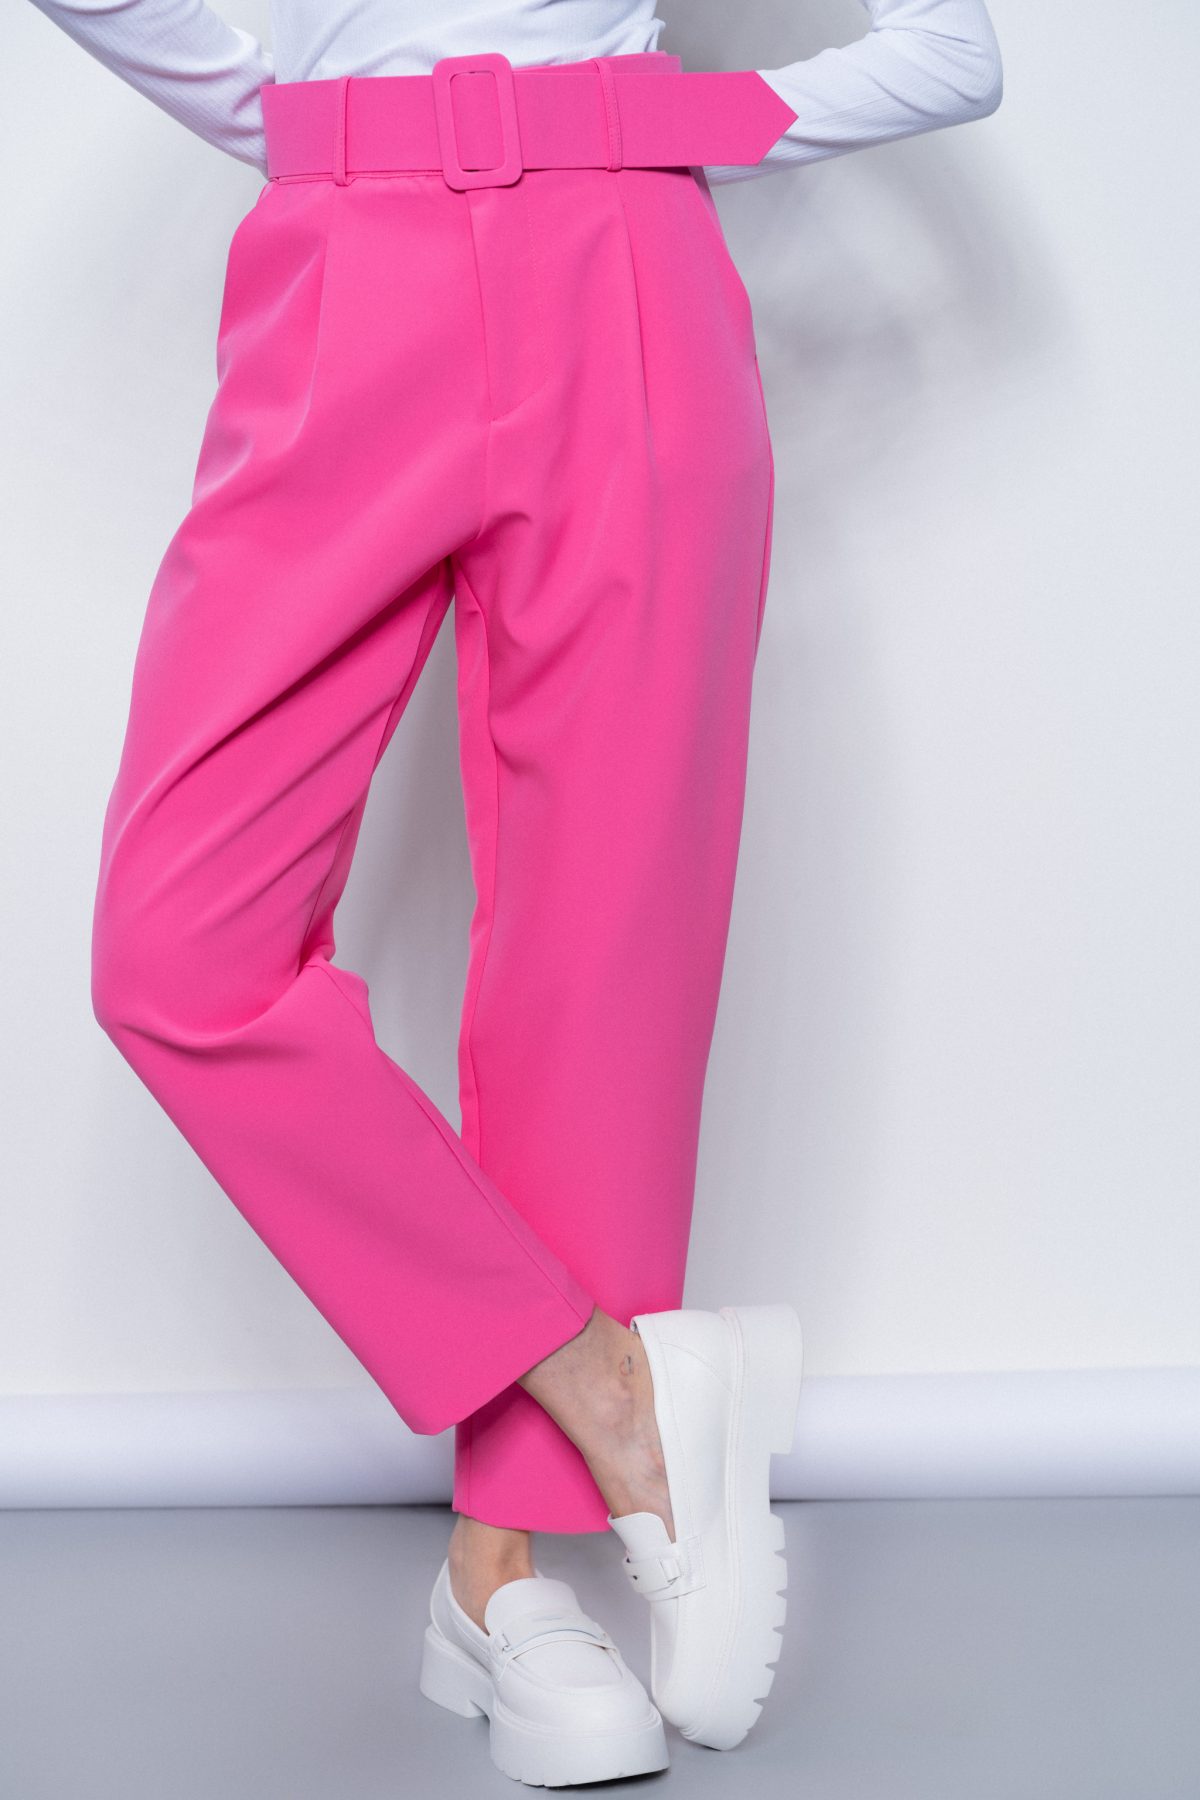 High-waisted pants with a belt in fuchsia color